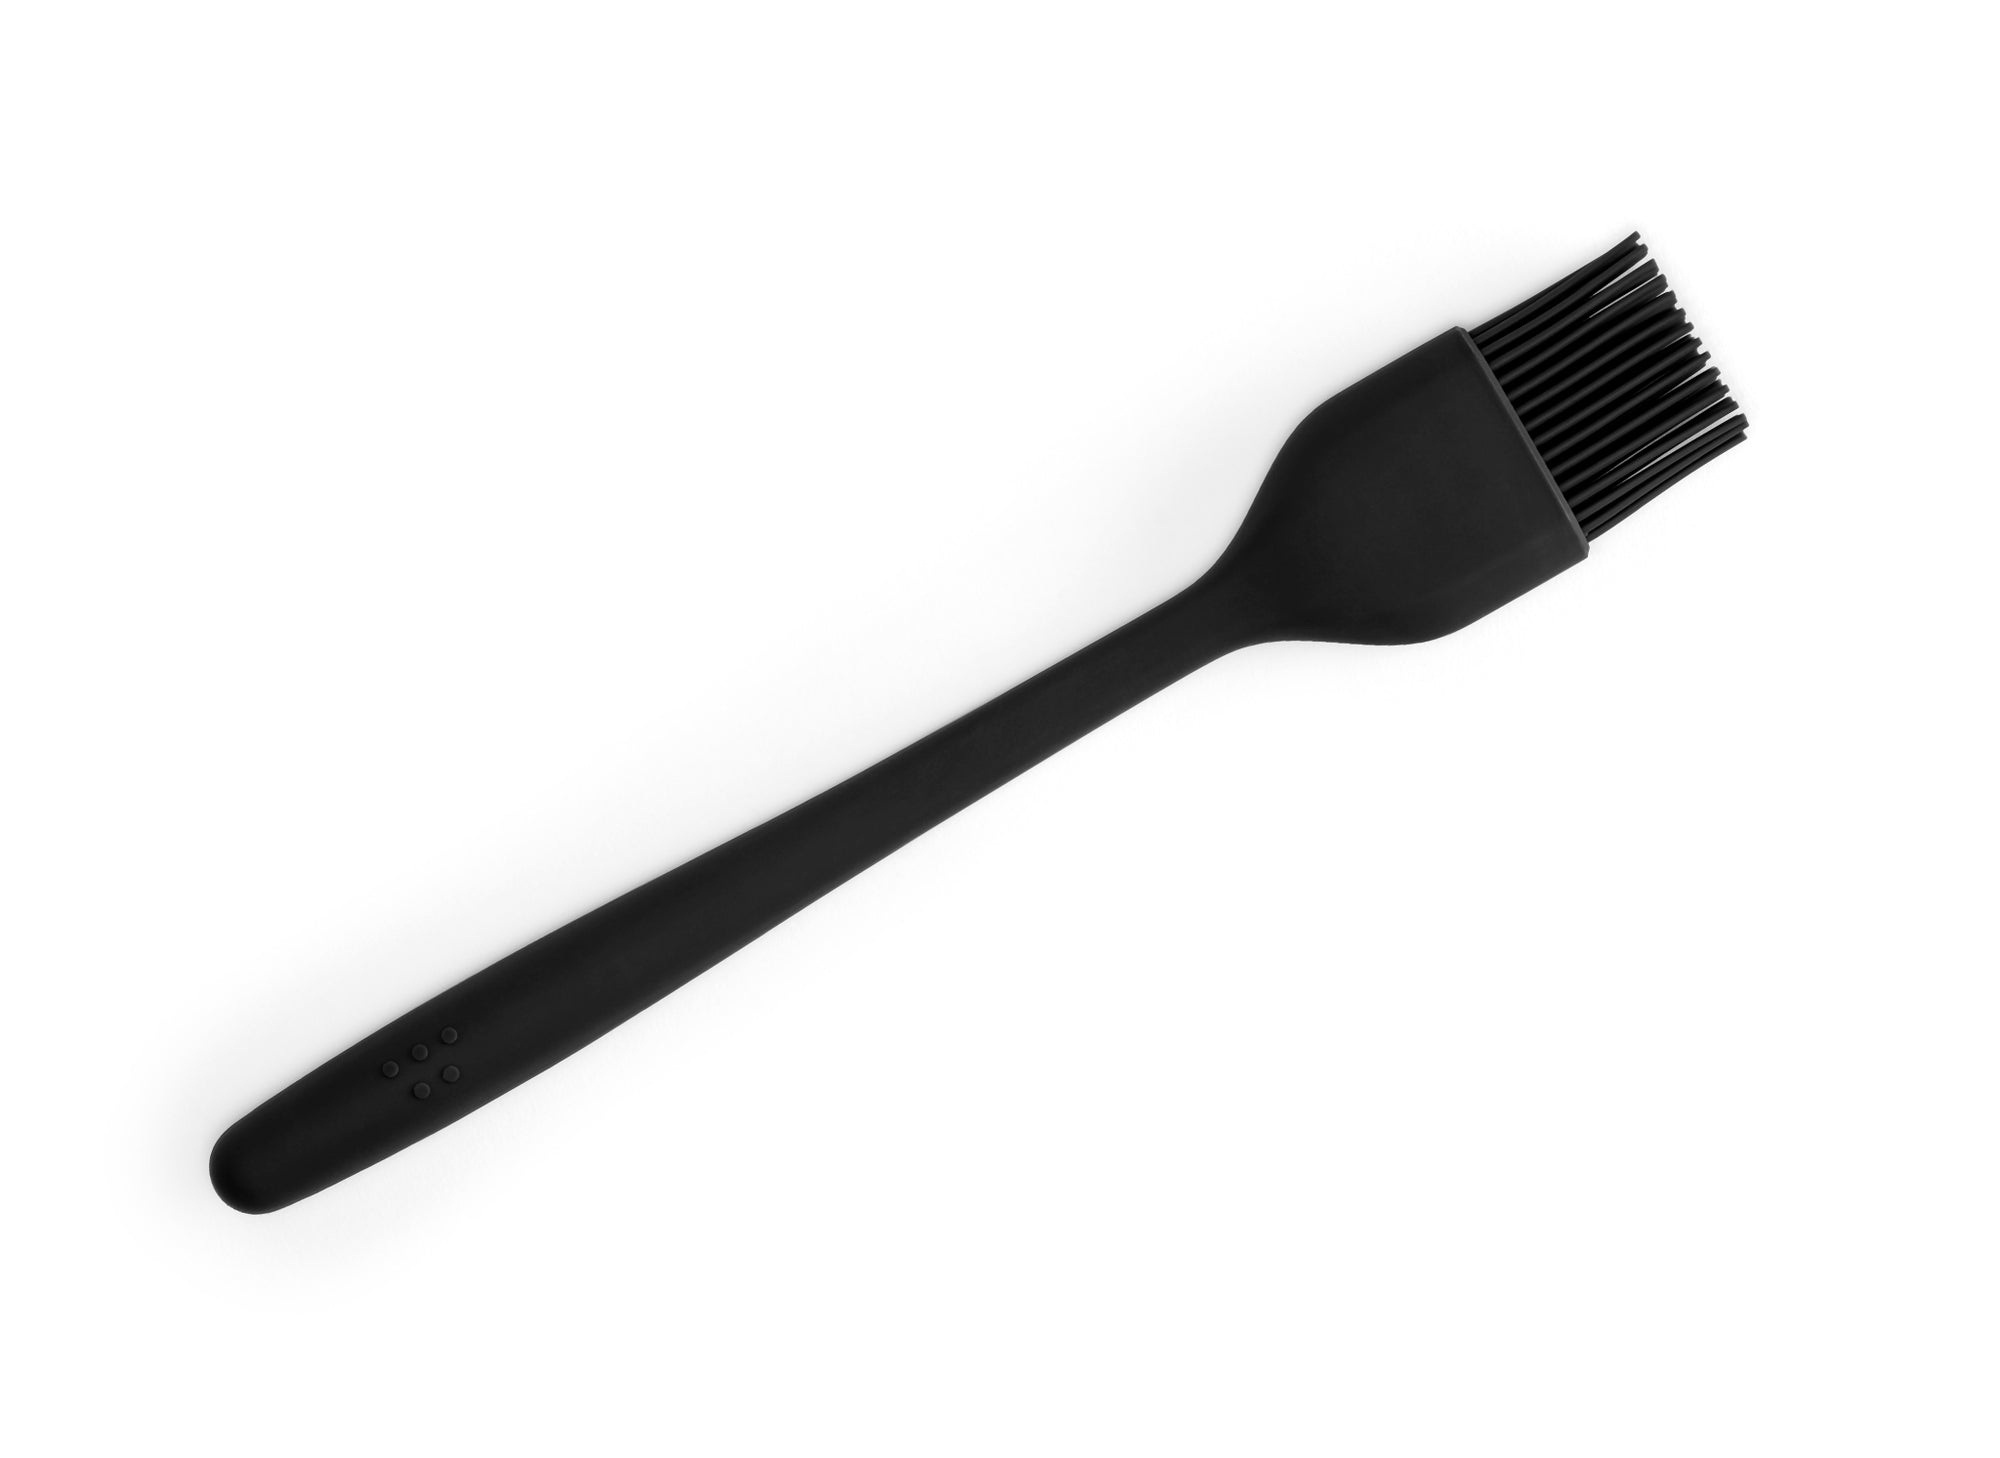 View of Black Misen Pastry Brush from above on a white background.